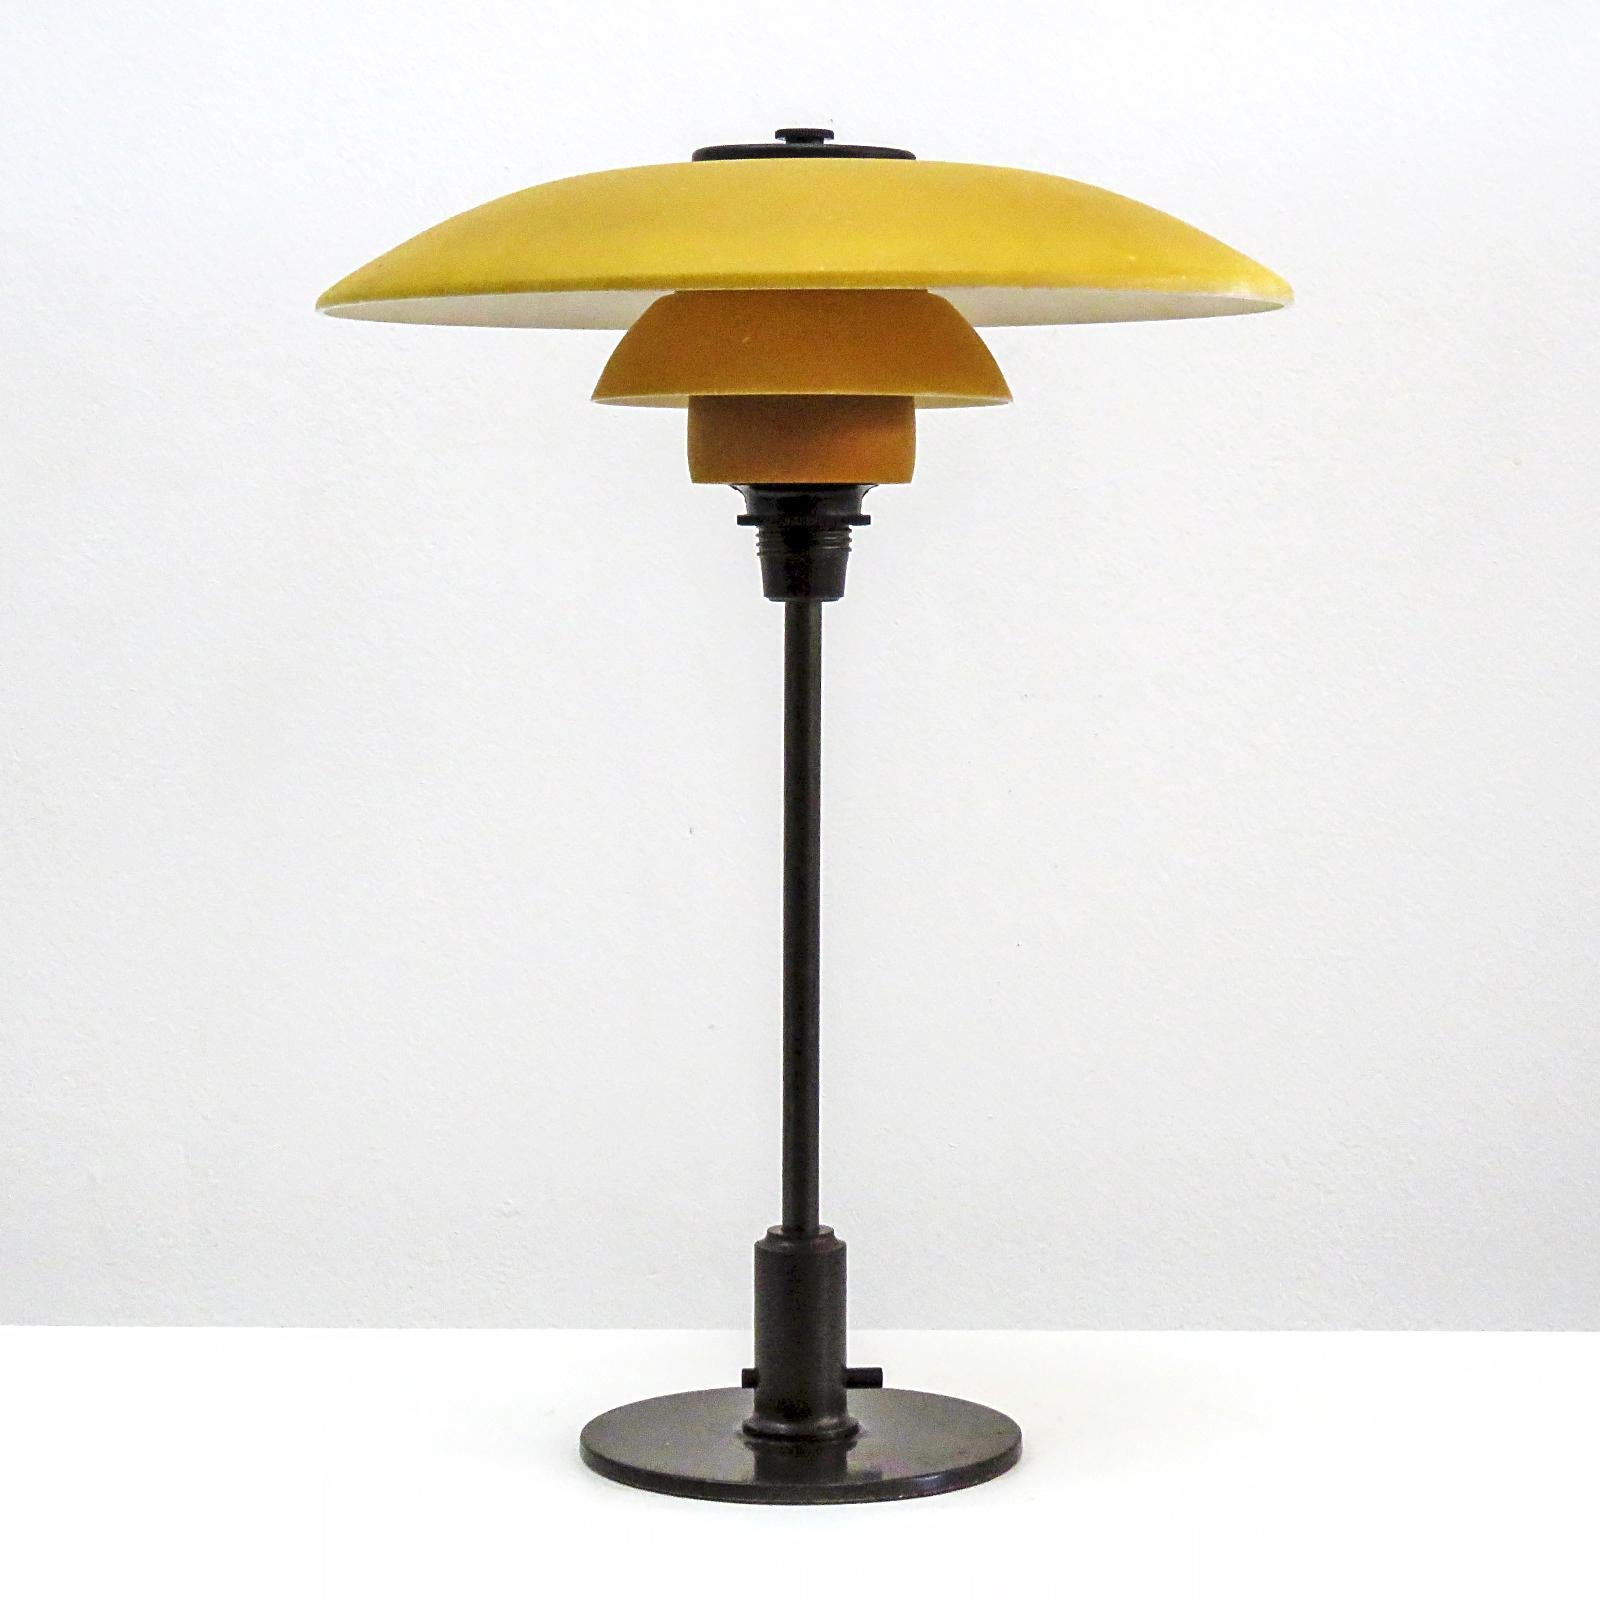 Rare Poul Henningsen. PH-3½/2 table lamp with original single-layer yellow painted/opal glass shade set on a browned brass stem and shade holder with wire legs. Bakelite through switch on the stem and bronze cover plate, produced by Louis Poulsen in